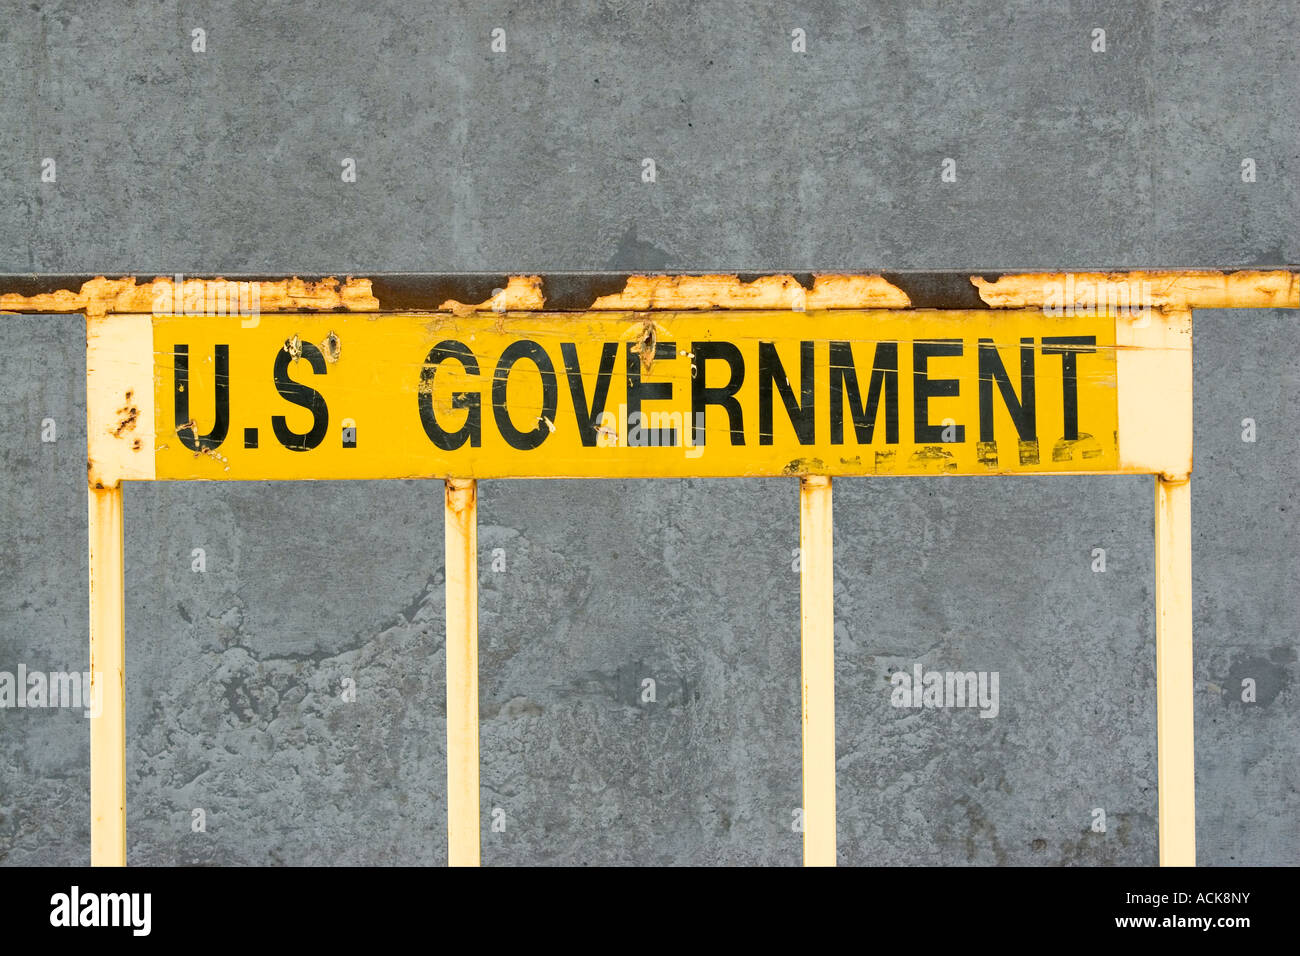 Rusted U.S. GOVERNMENT sign Stock Photo